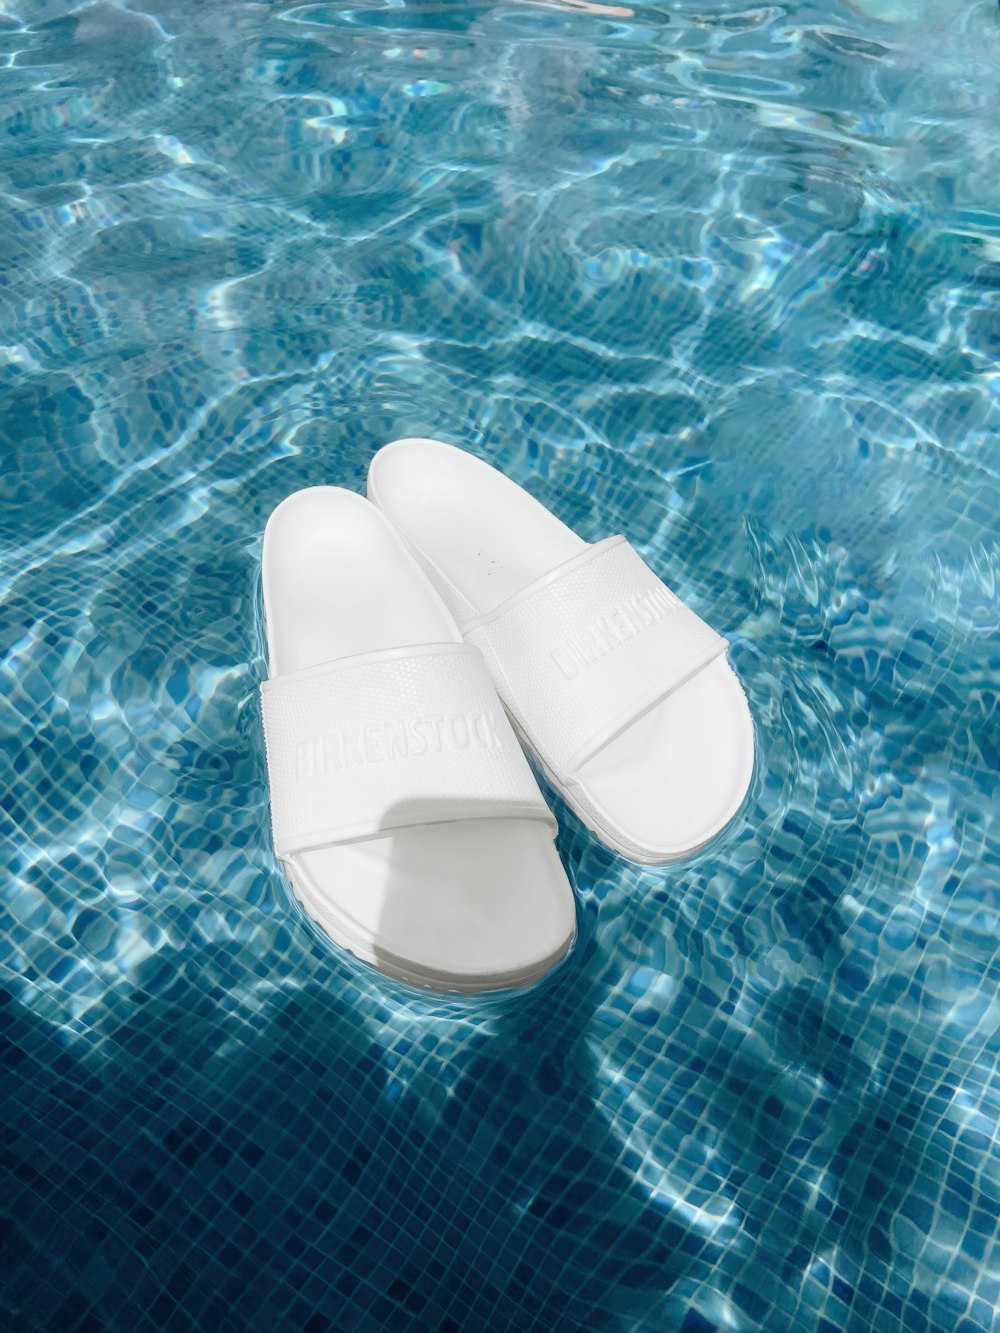 a pair of white slippers floating in a pool of water